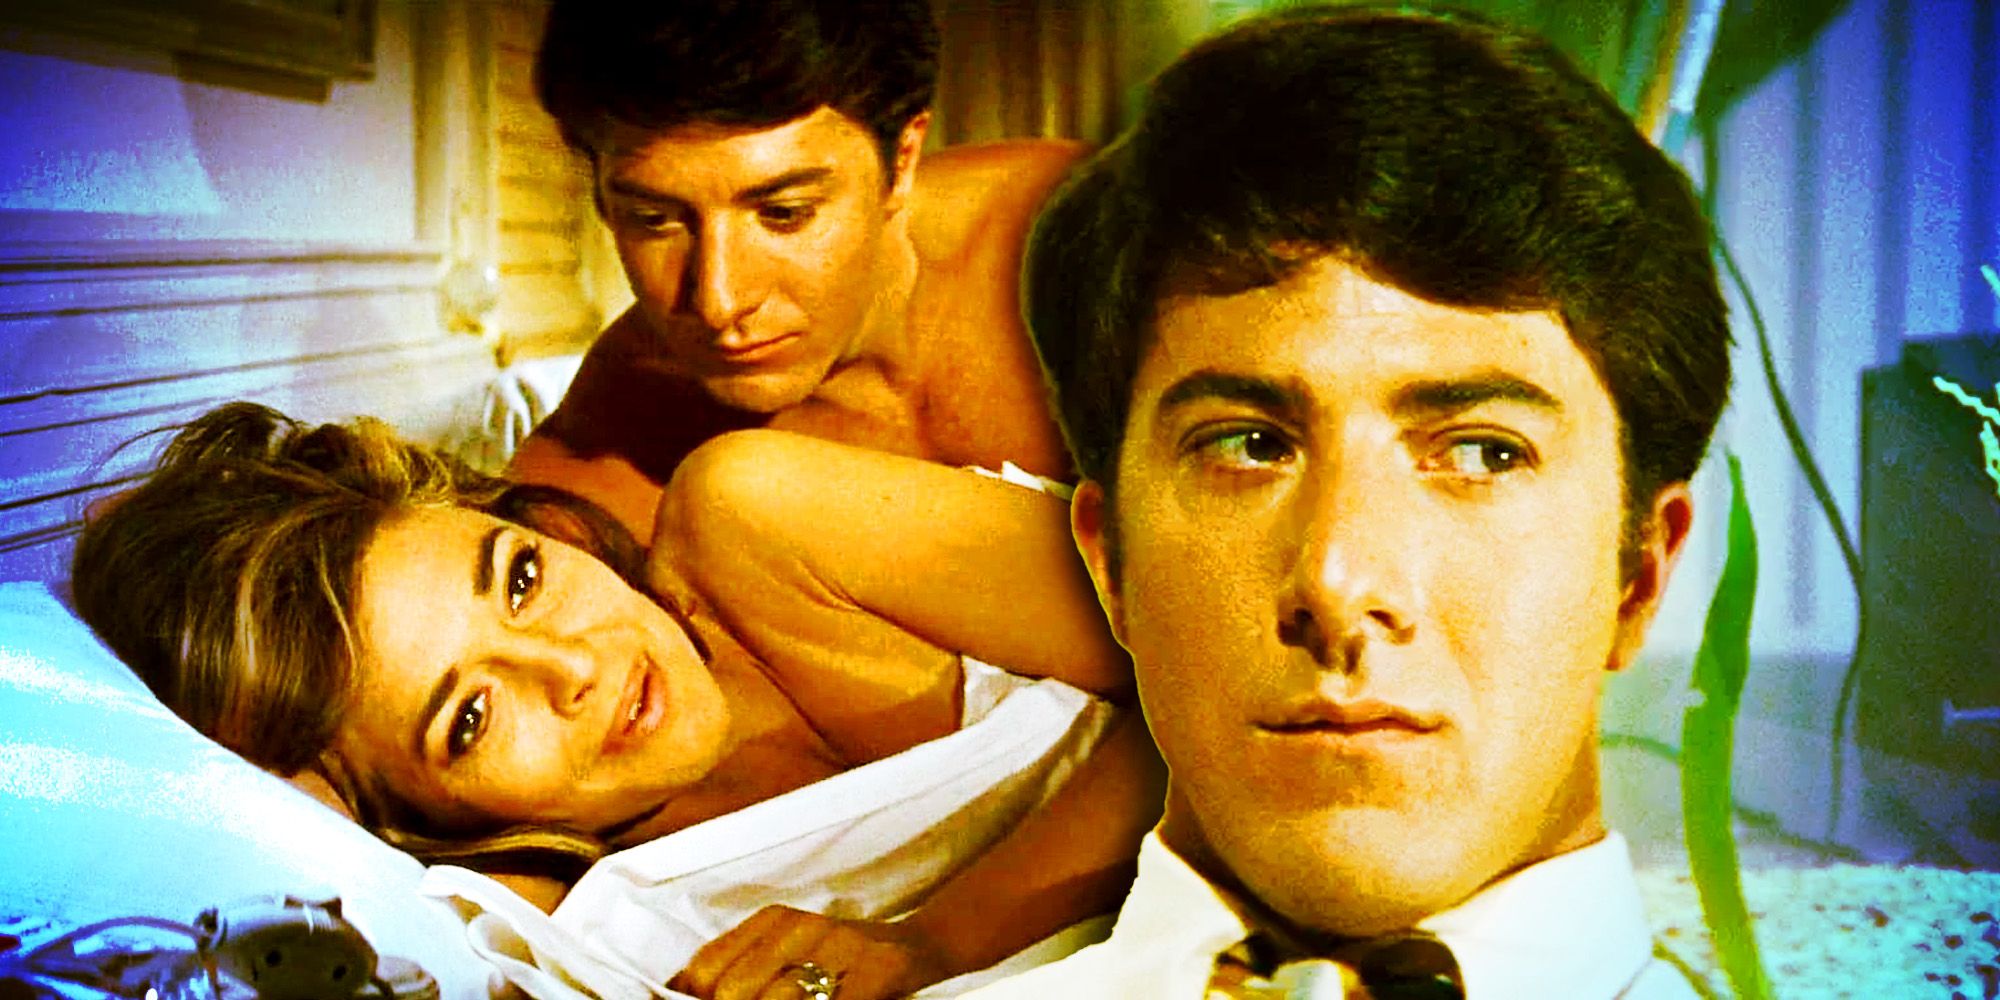 Collage of images from The Graduate